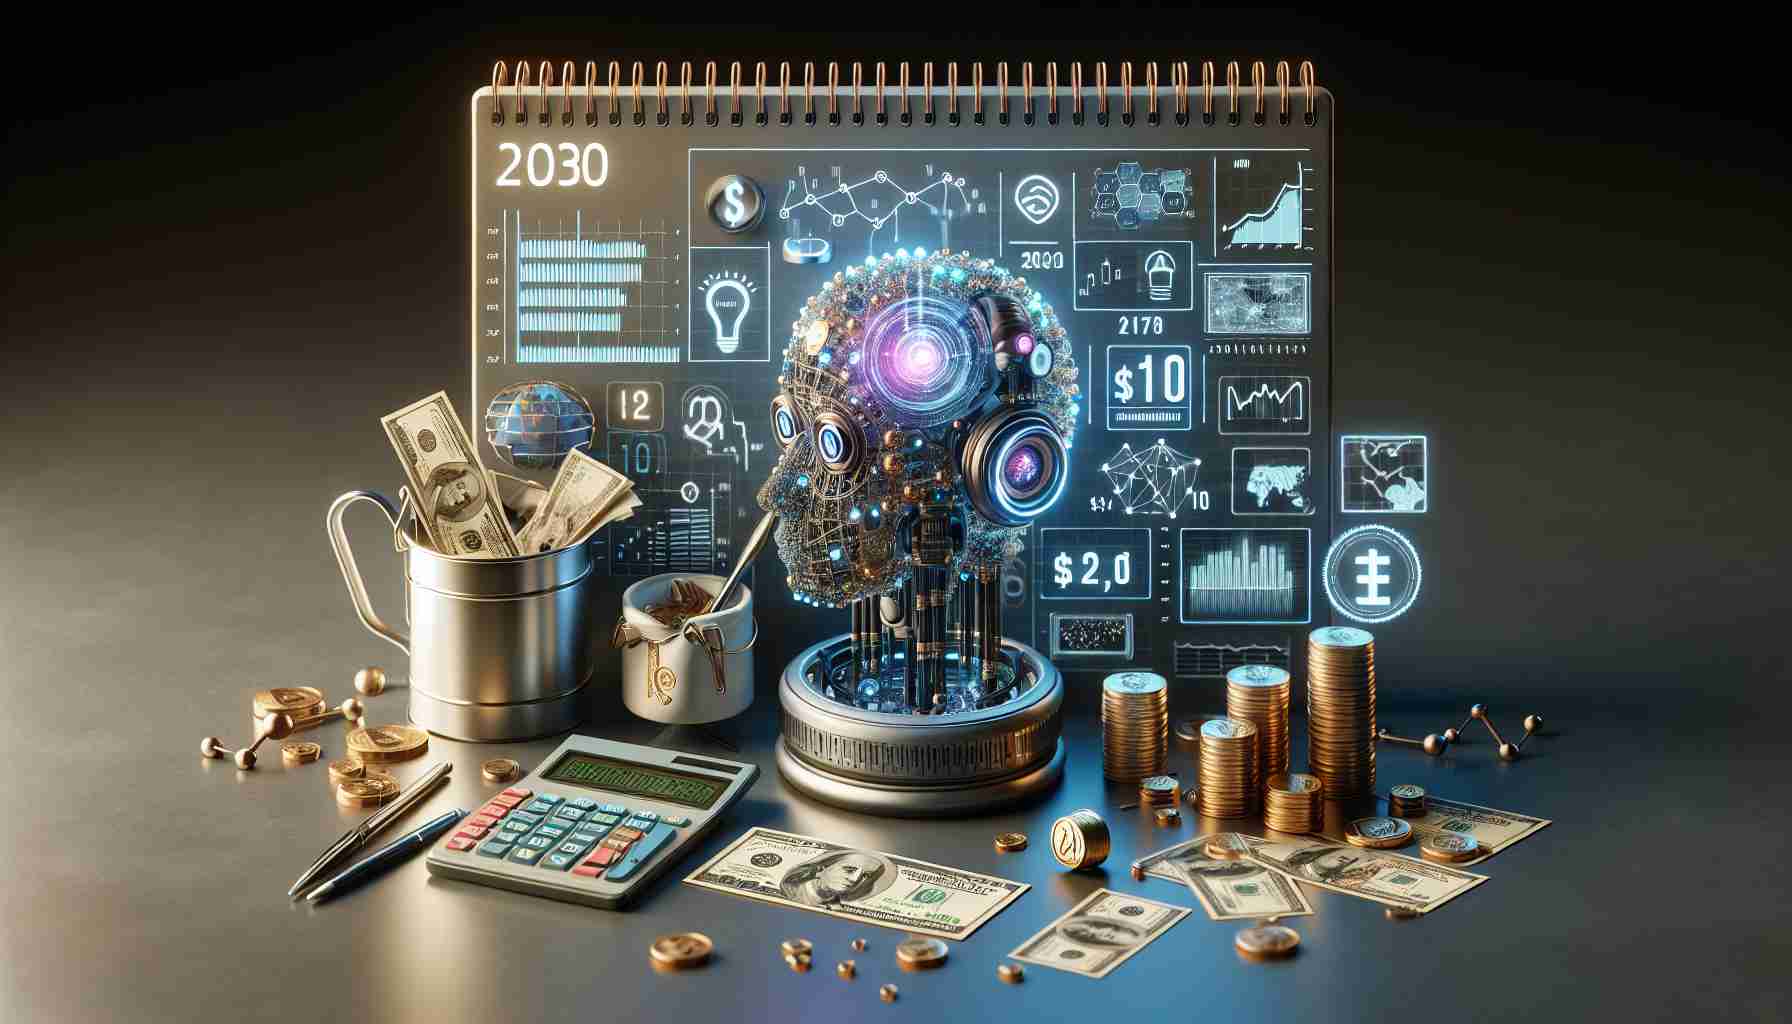 Global AI Market Set to Reach Over $1 Trillion by 2030